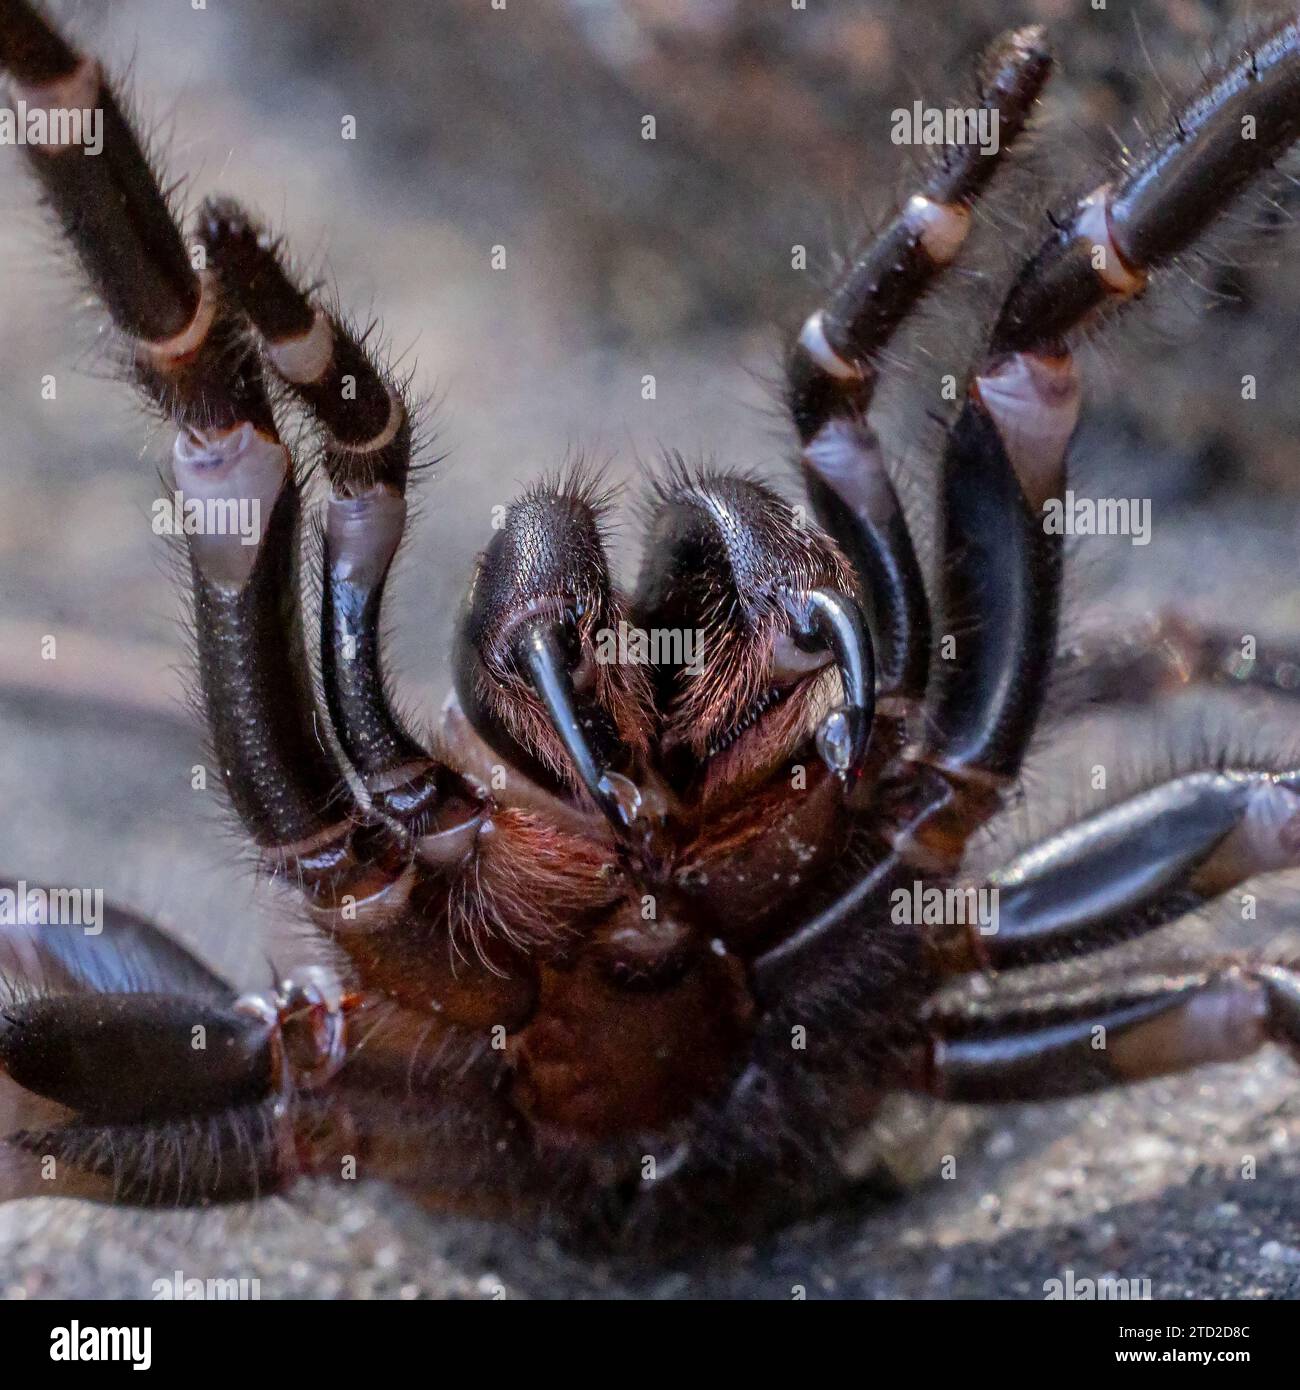 Venom droplets on the fangs of a Sydney Funnel Web Spider Stock Photo